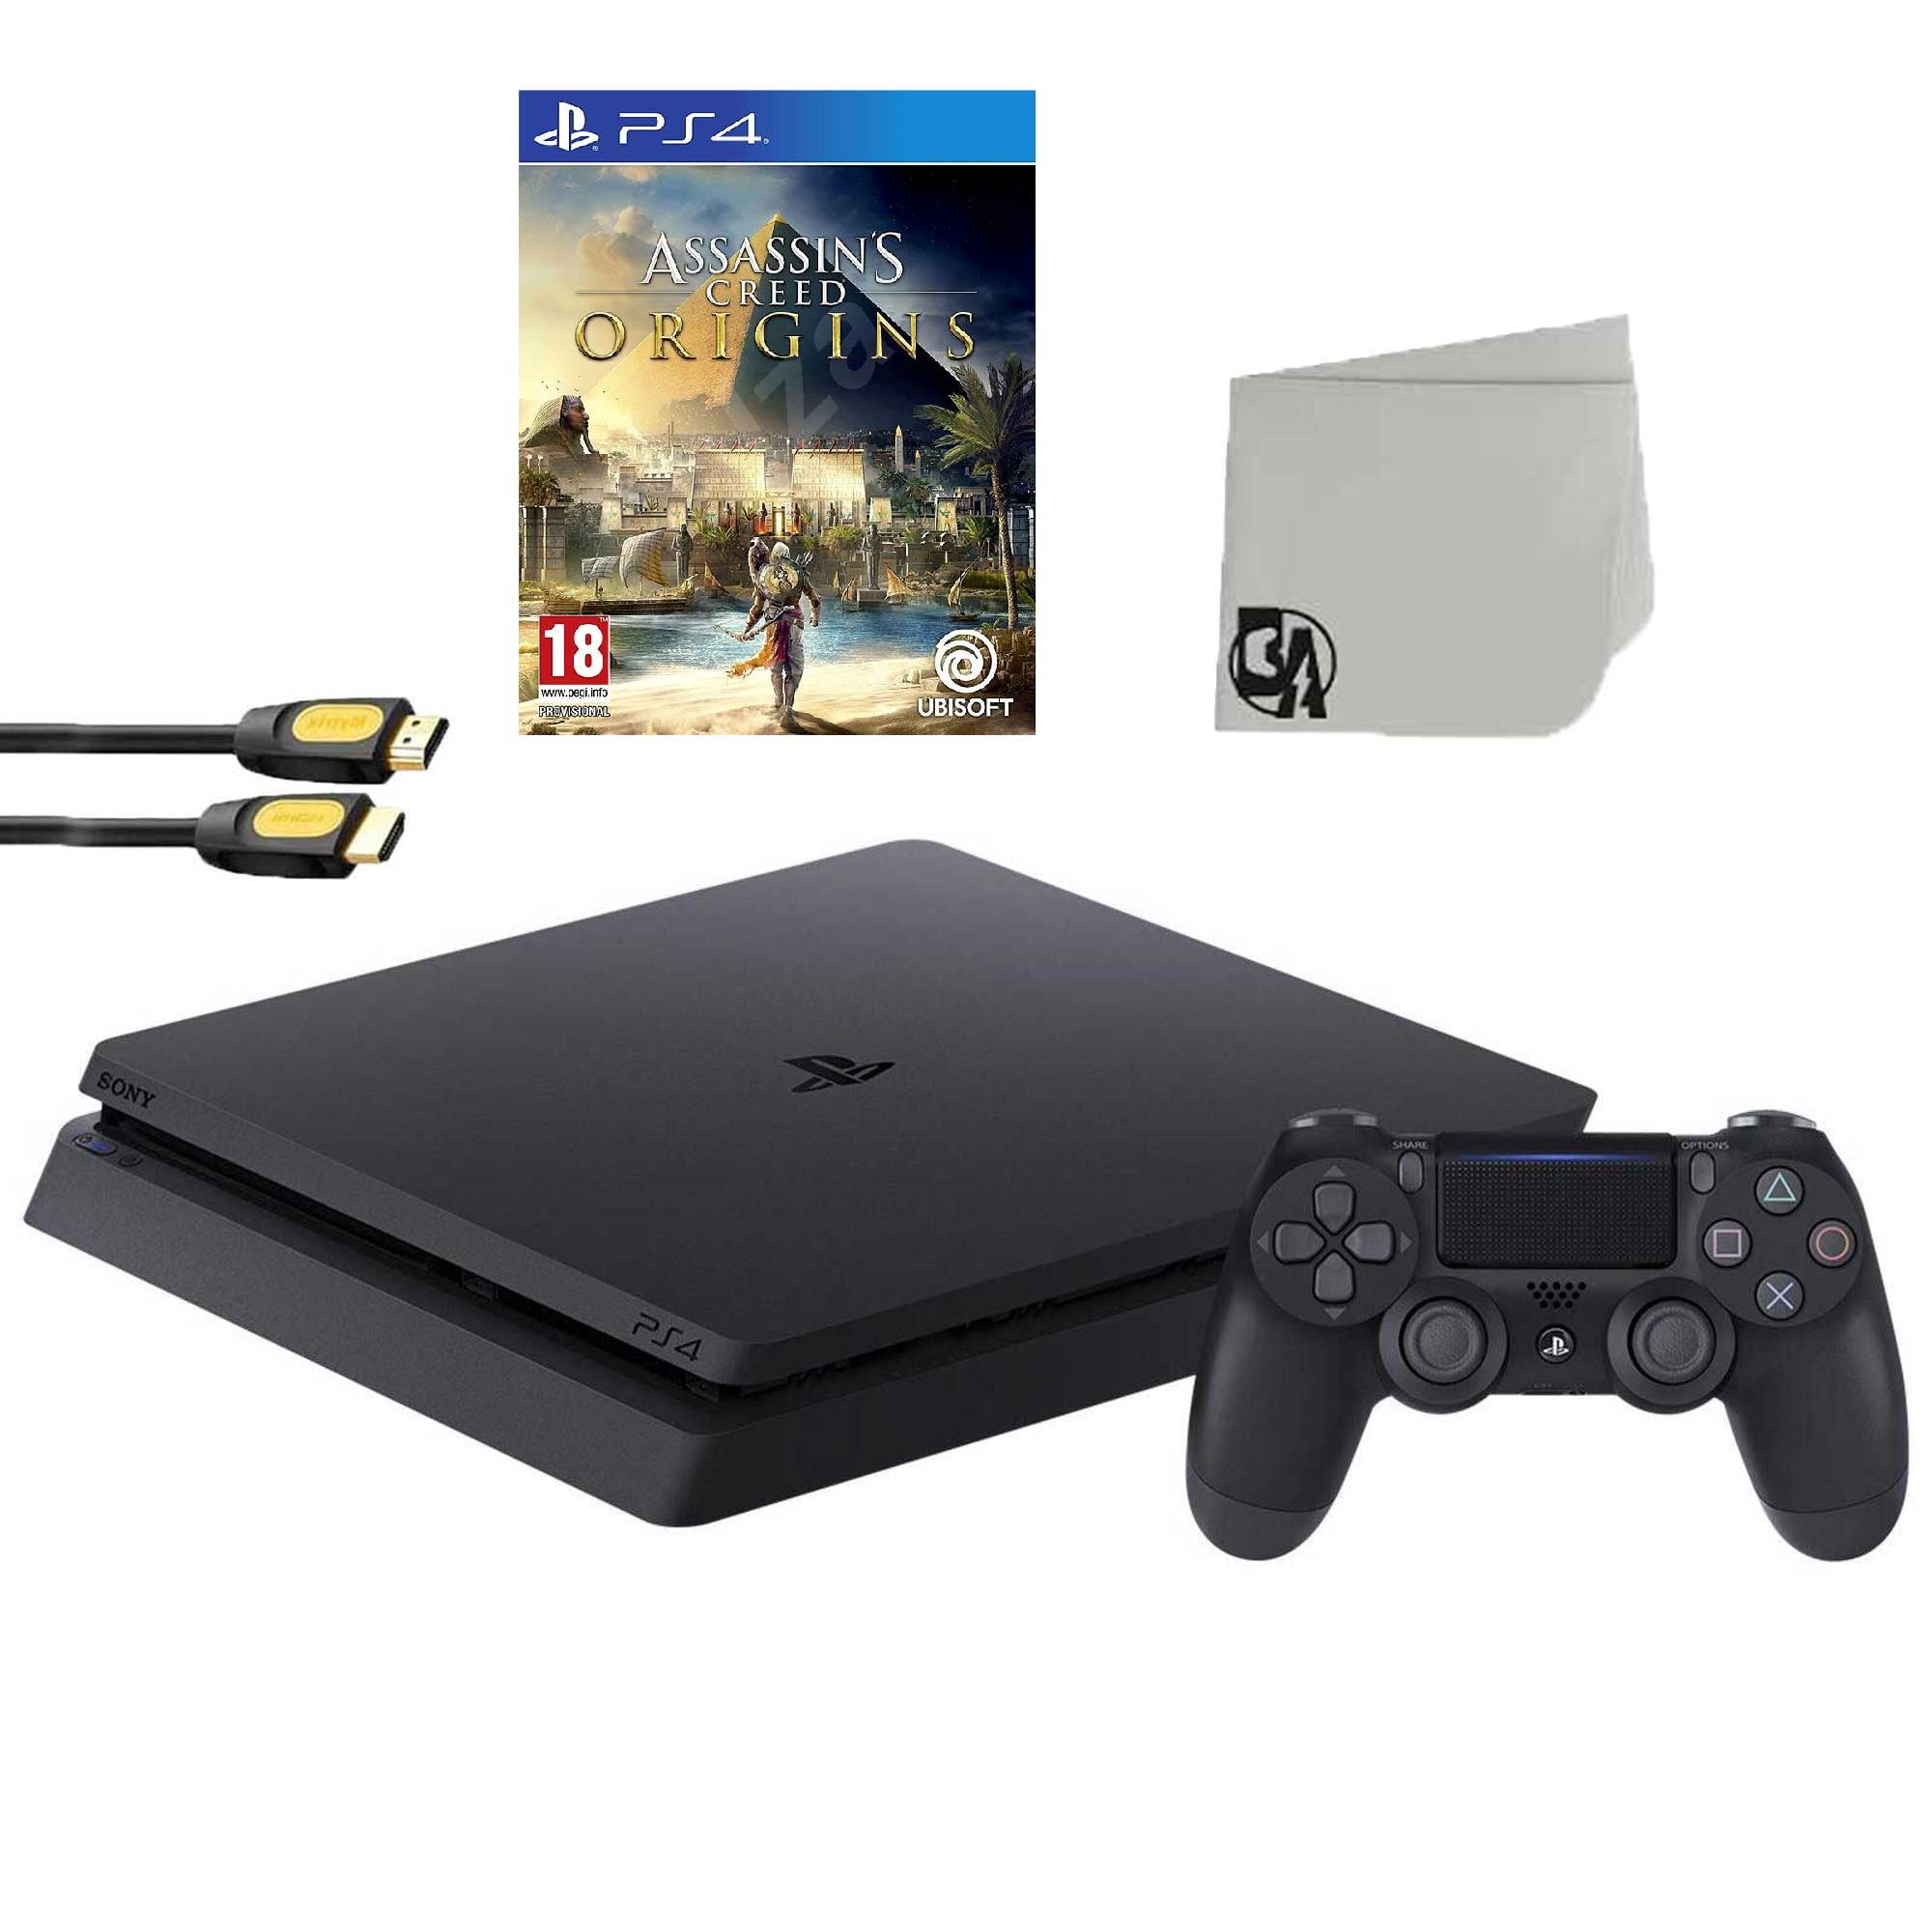 Pre-Owned Sony PlayStation 4 500GB Gaming Console Black with Days Gone BOLT  AXTION Bundle (Refurbished: Like New) 